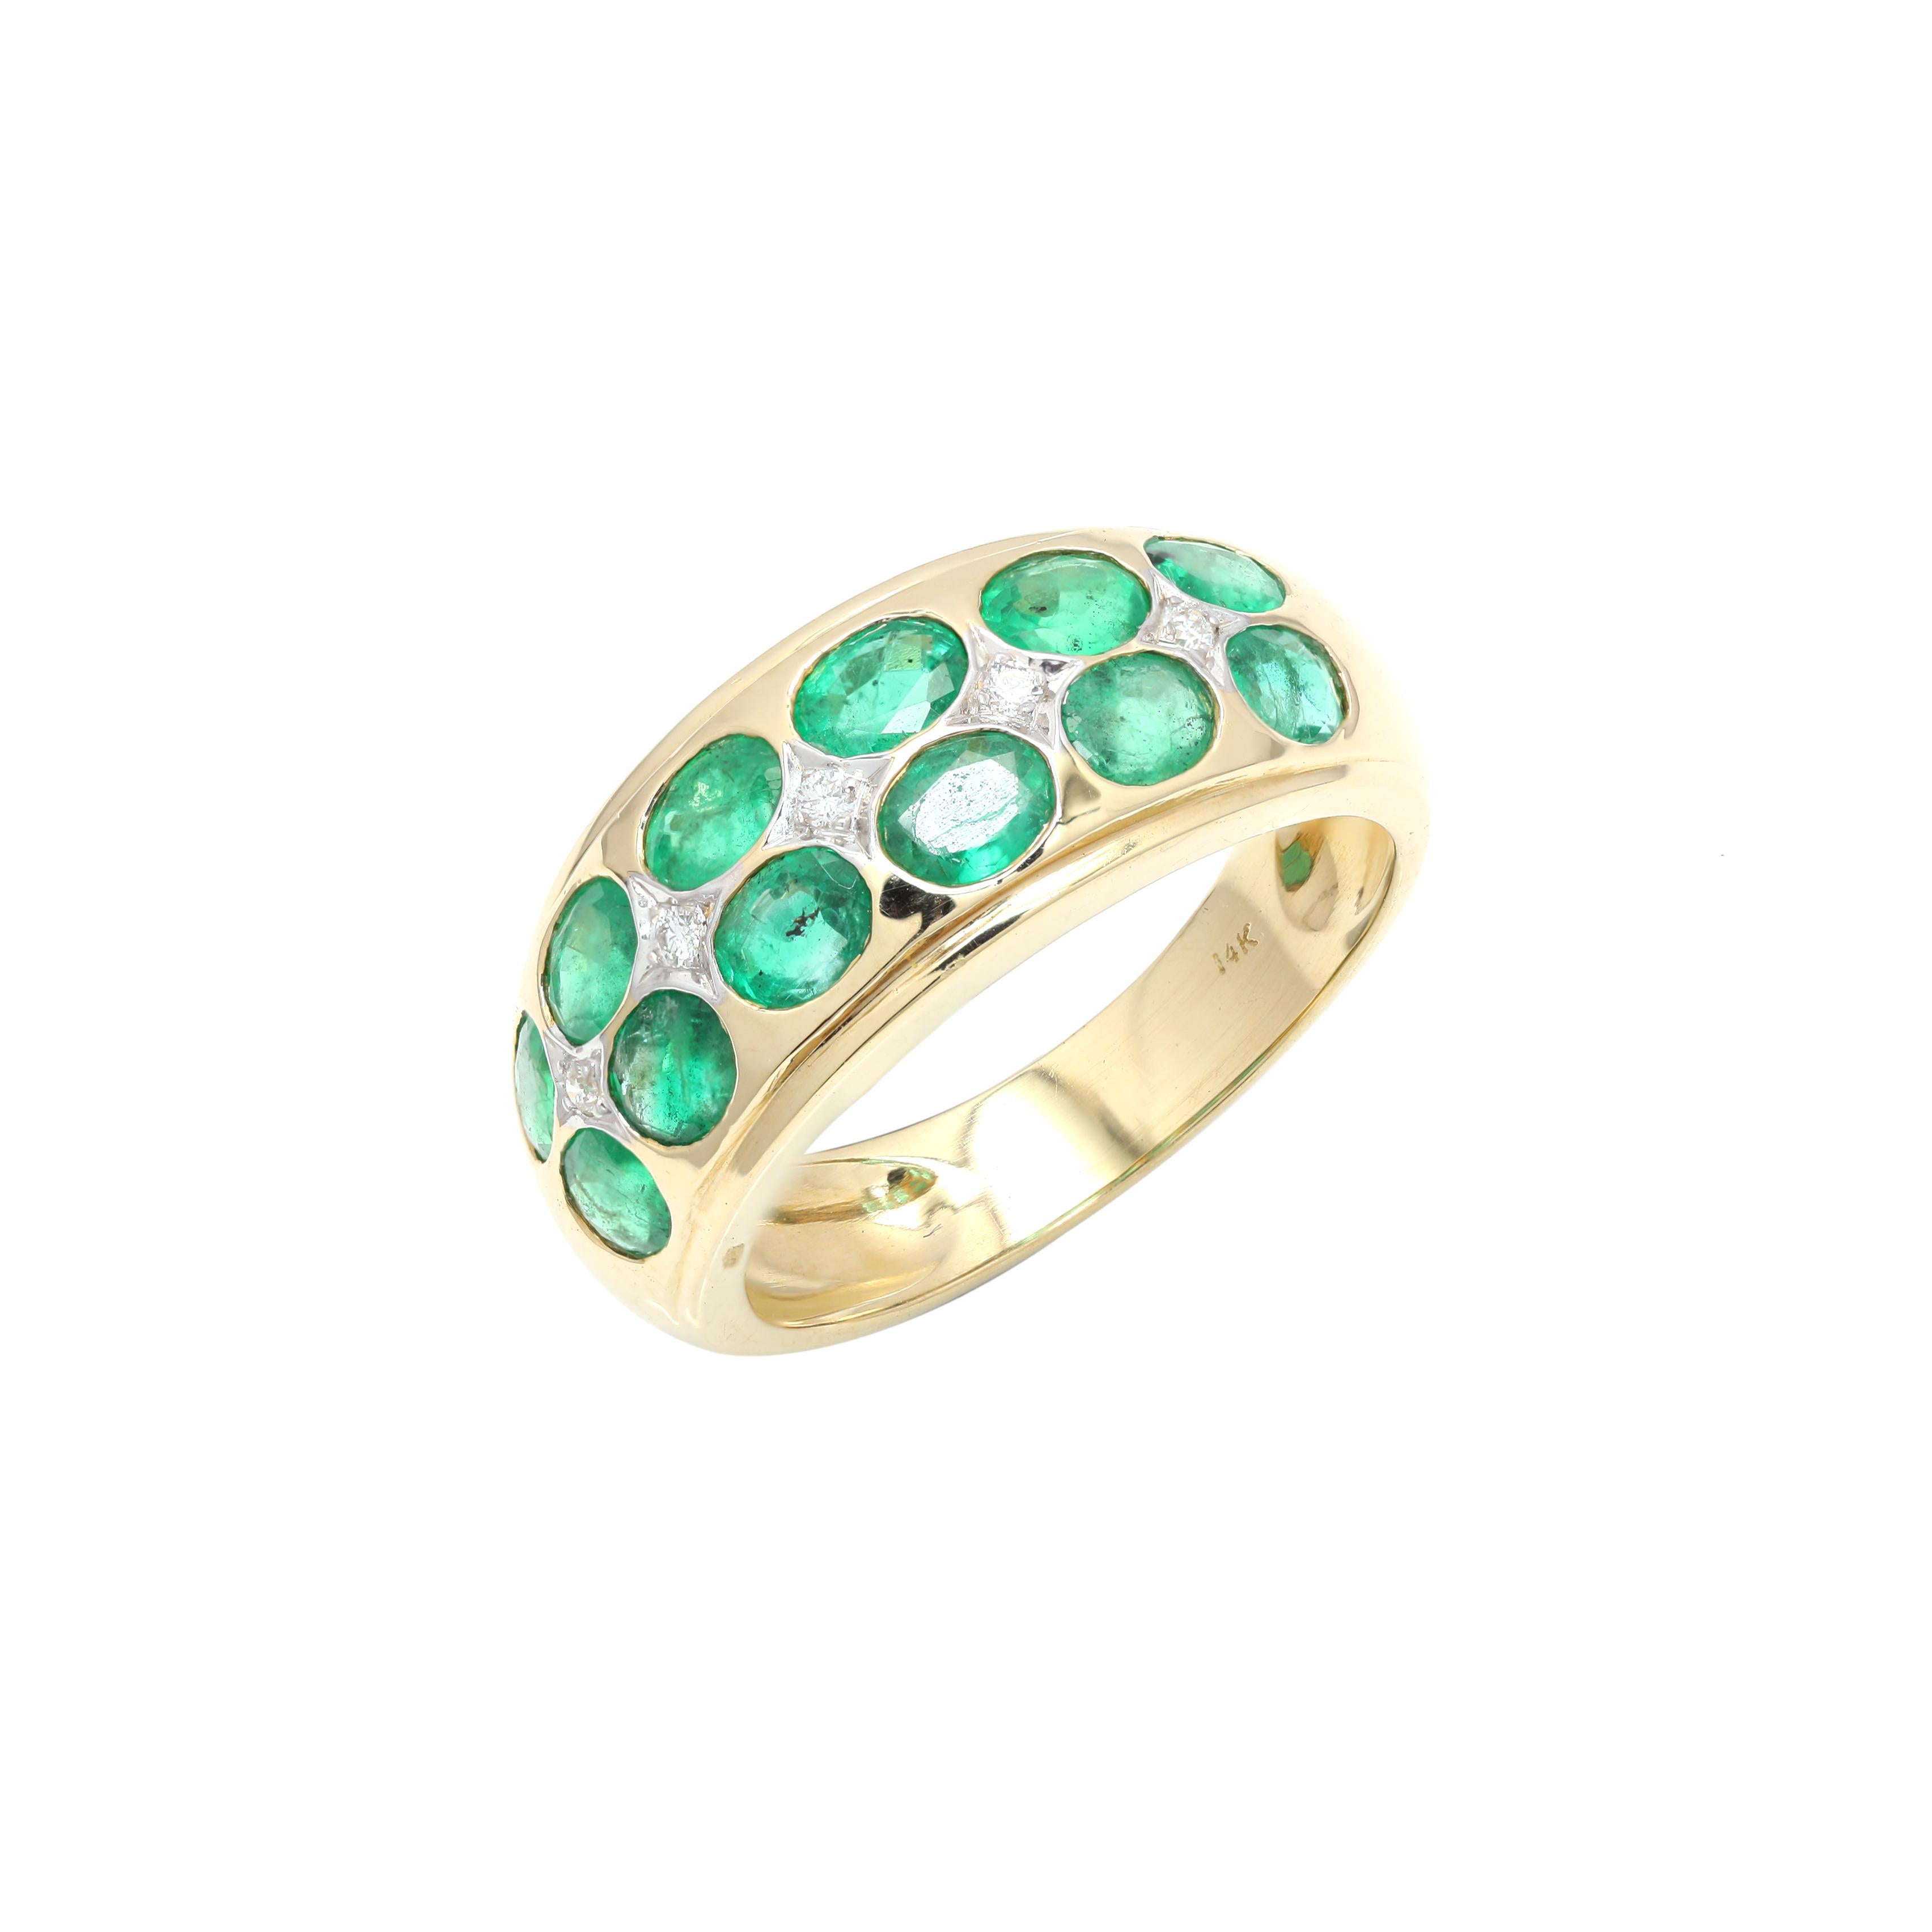 For Sale:  Emerald Diamond Wedding Band Ring for Father in 14k Solid Yellow Gold 5